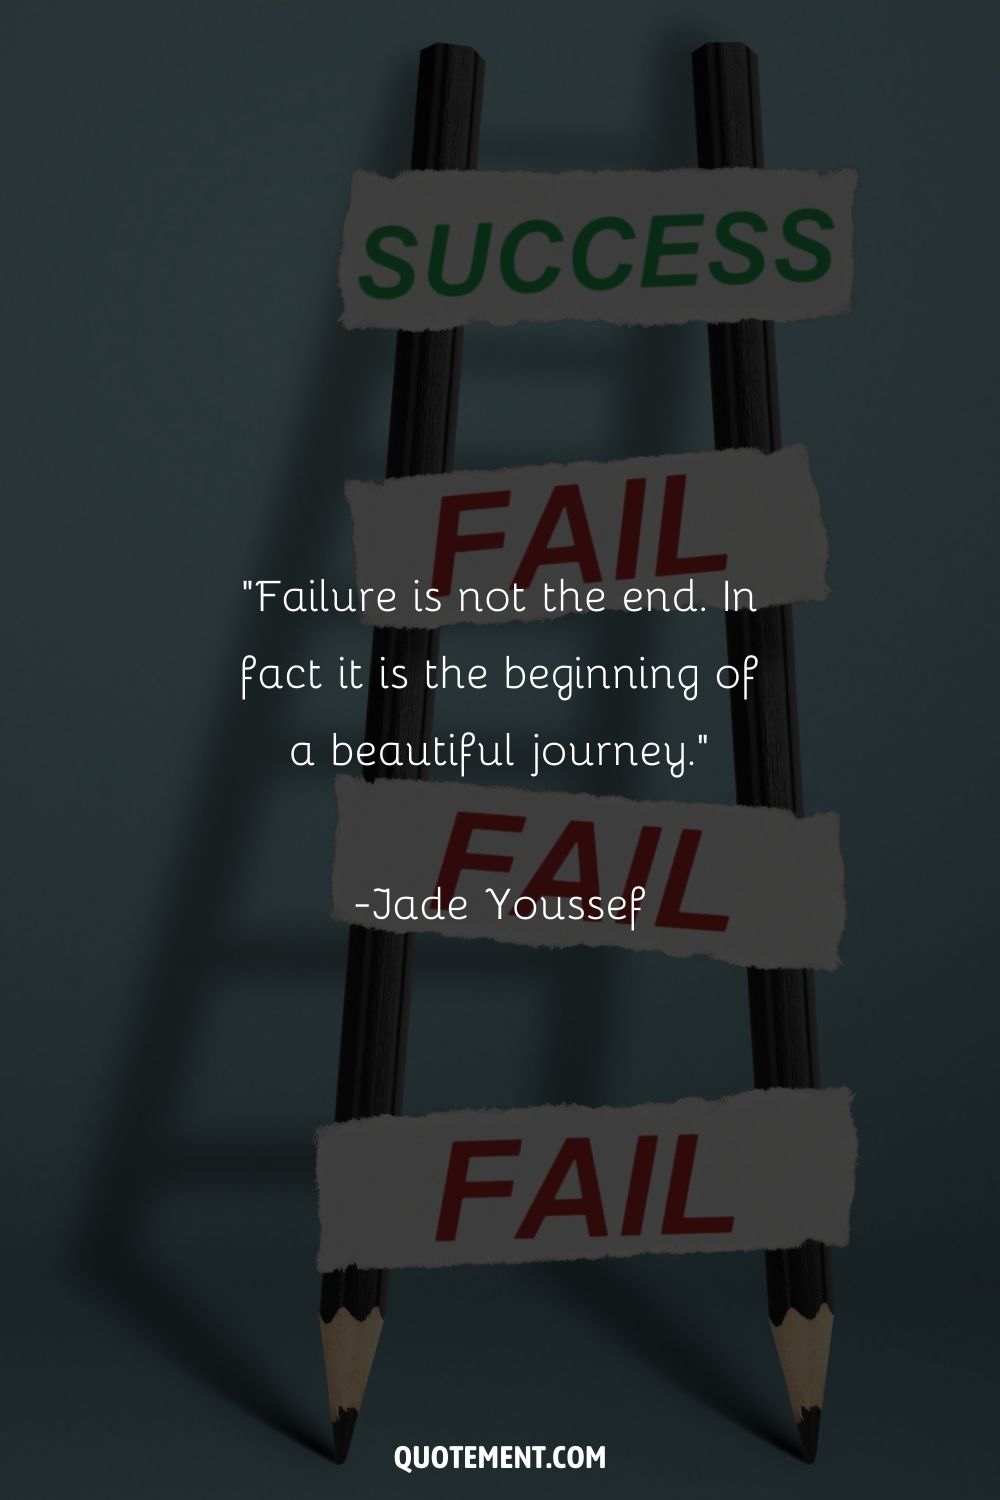 “Failure is not the end. In fact it is the beginning of a beautiful journey.” ― Jade Youssef